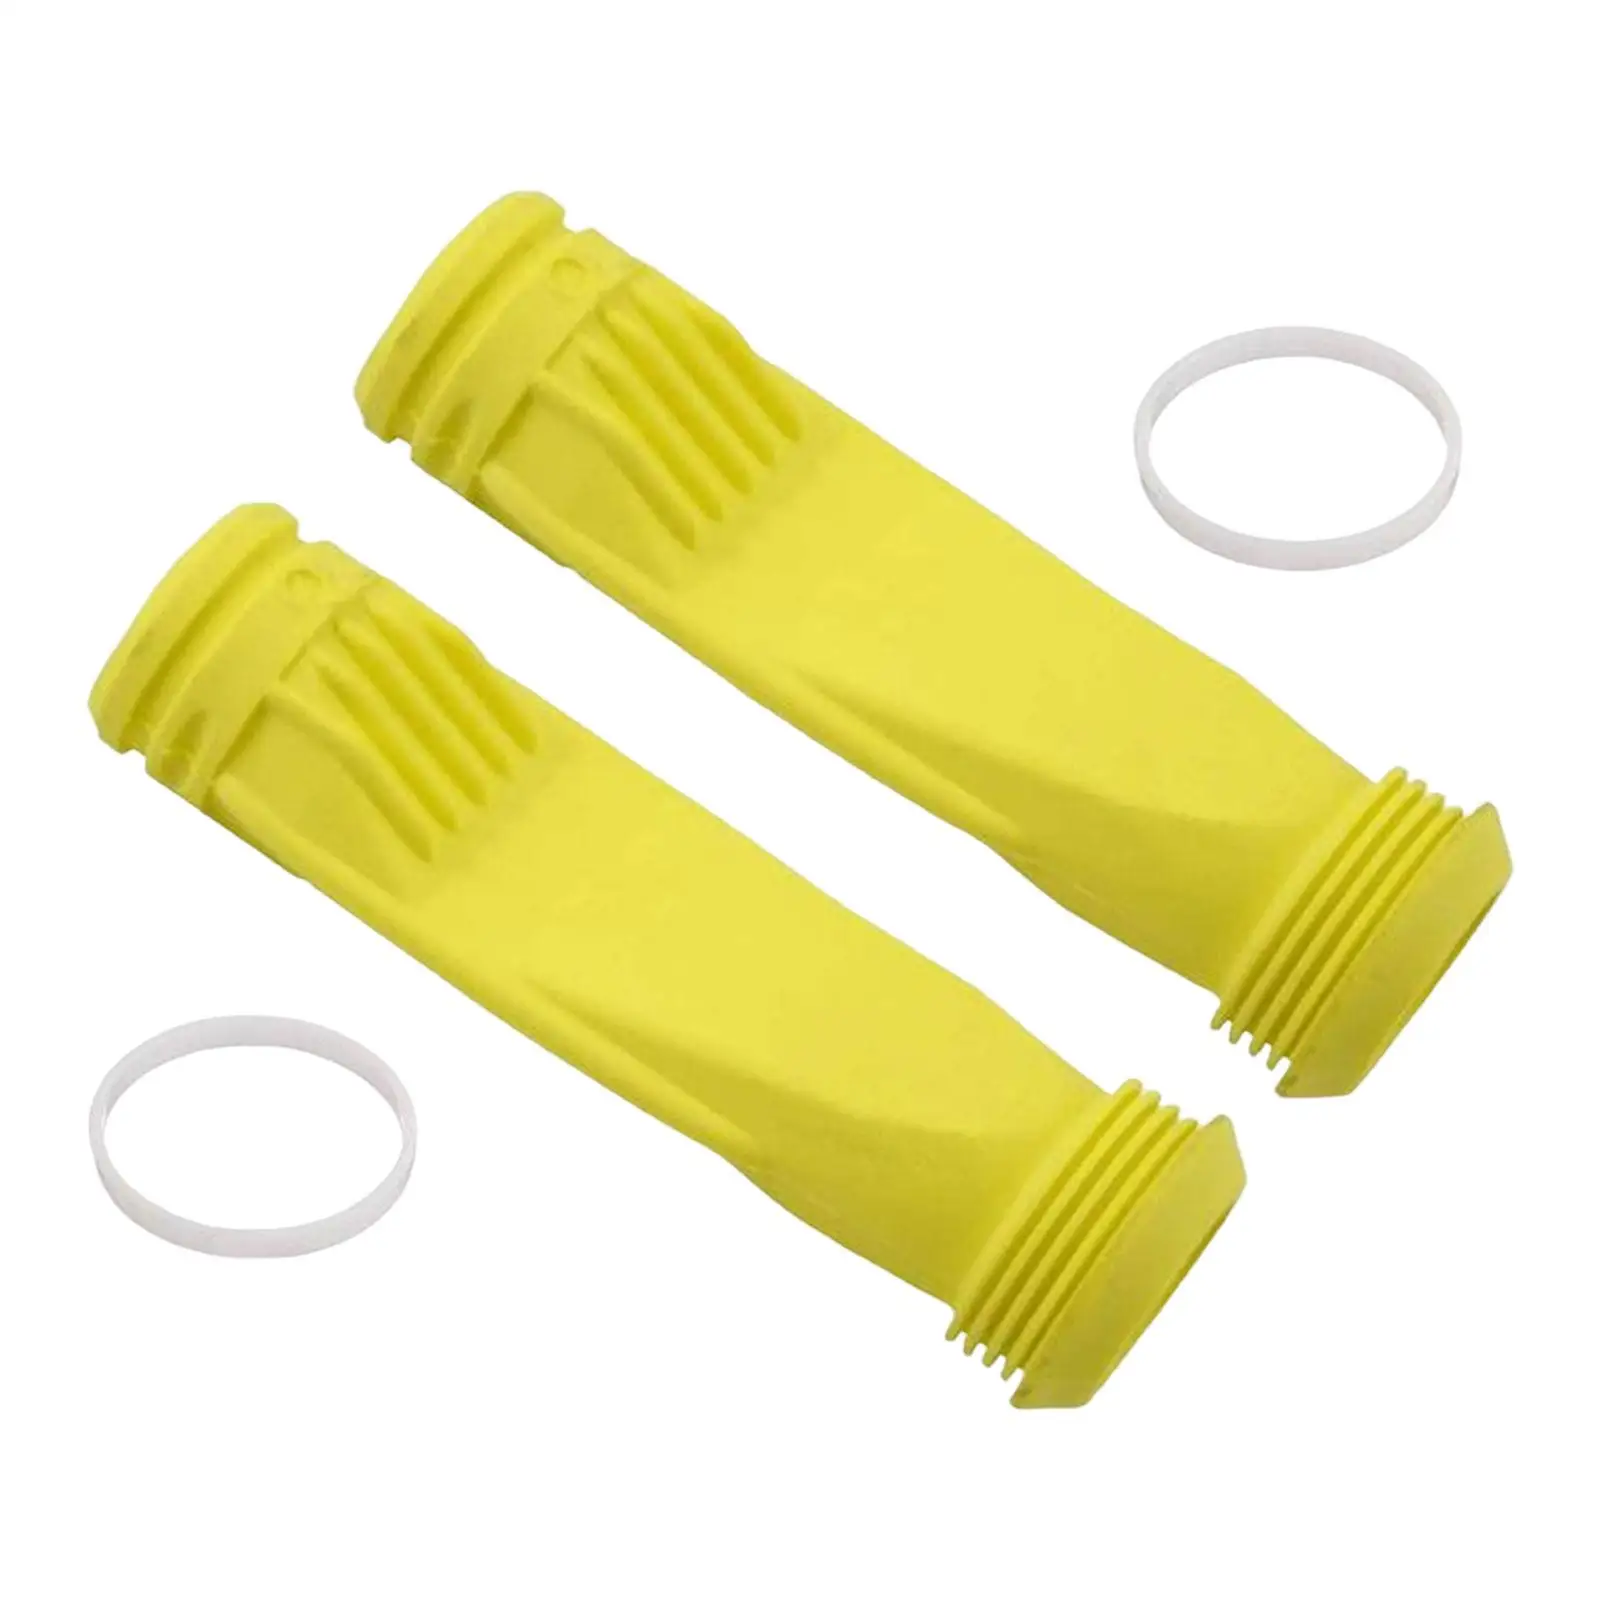 2x Pool Cleaner Flexible Long Life Easy to Mount Strong Portable W69698